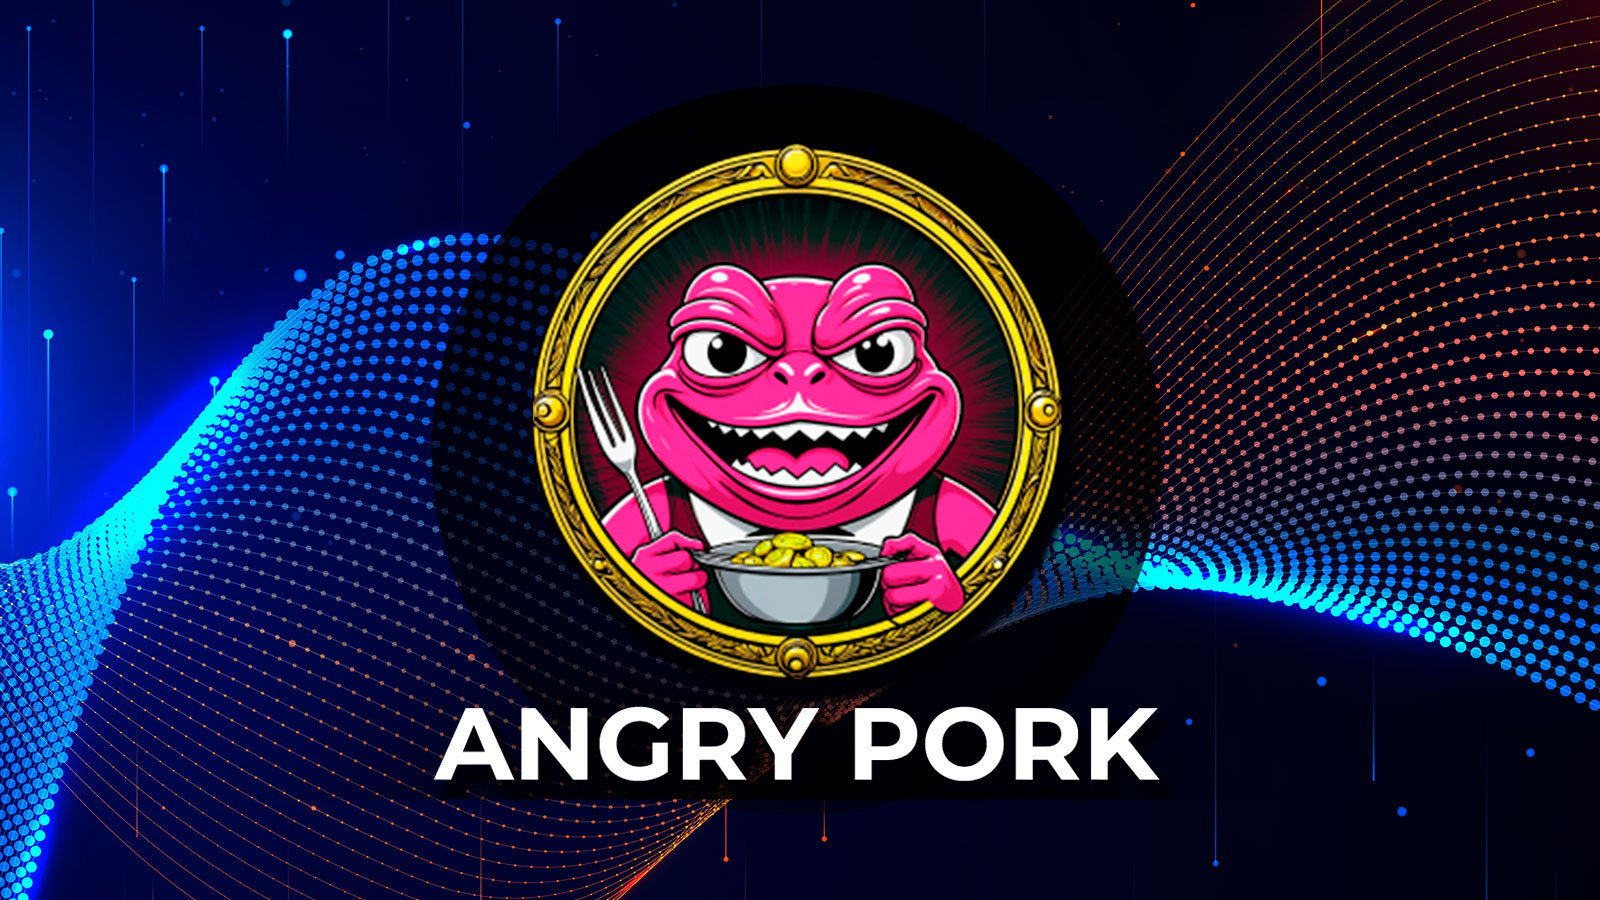 Angry Pepe Fork (APORK) Sees More Activity, While XRP and Notcoin Seeing Influx